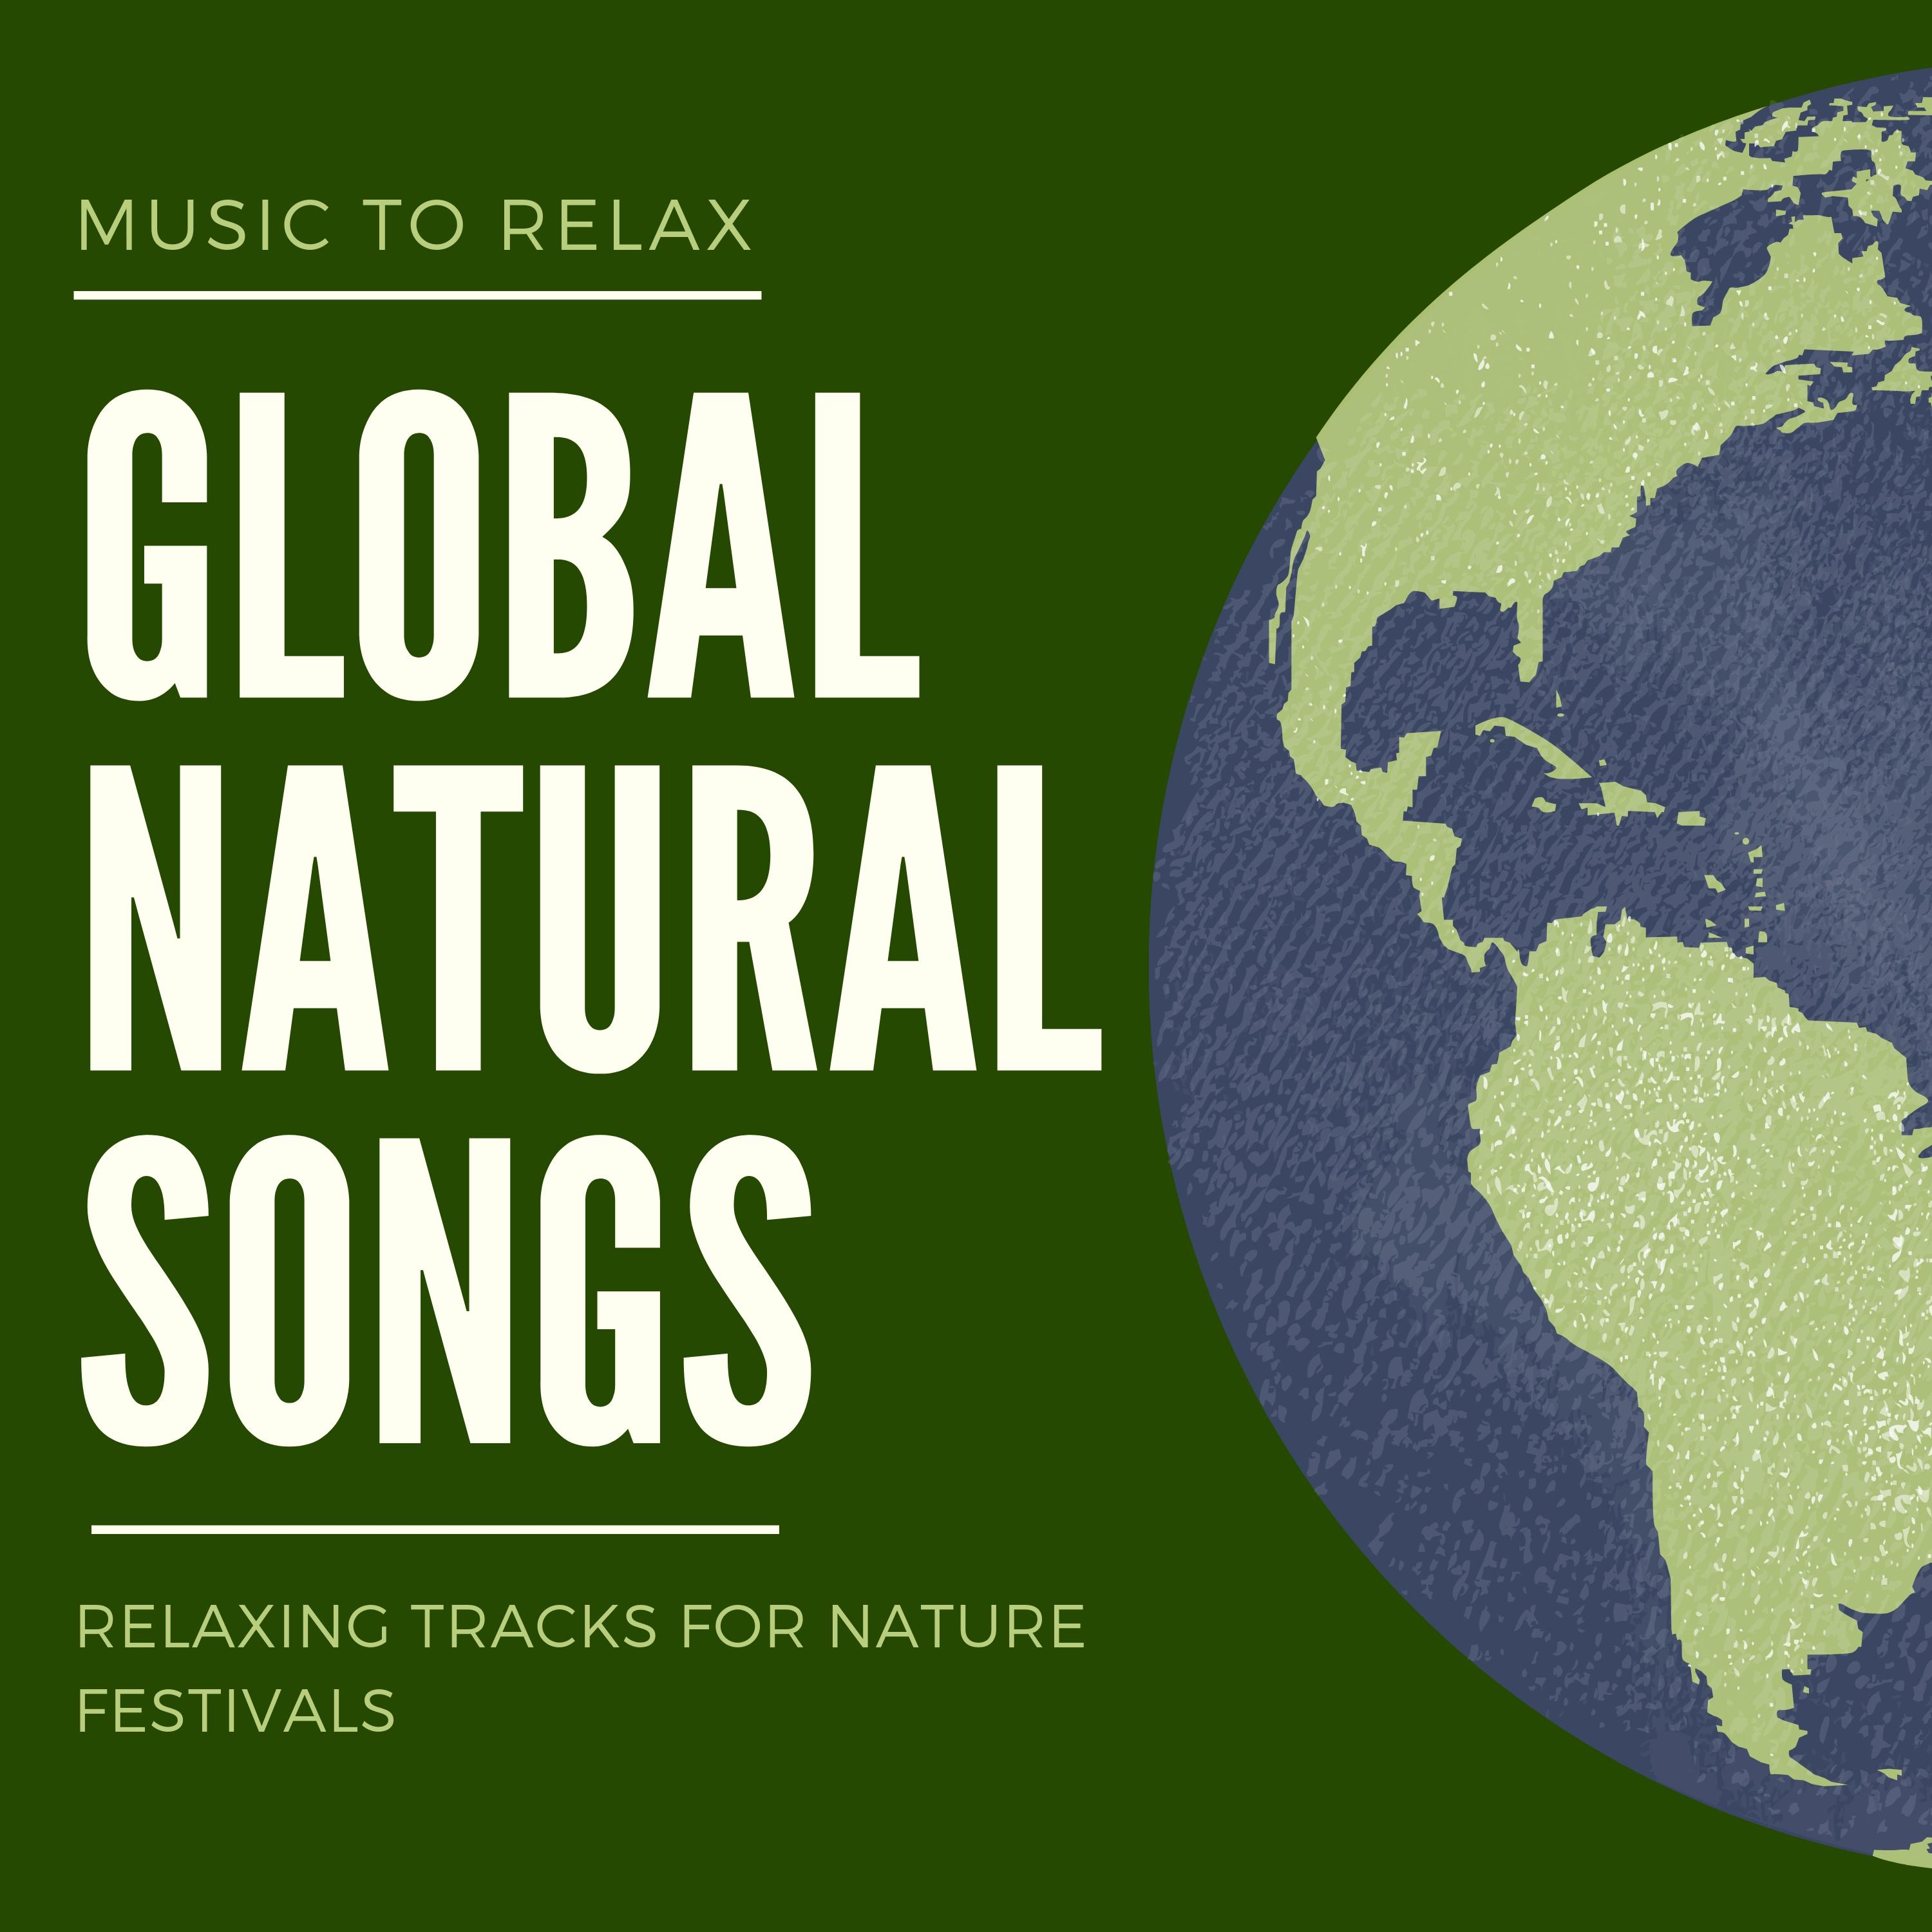 Global Natural Songs - Music to Relax, Relaxing Tracks for Nature Festivals